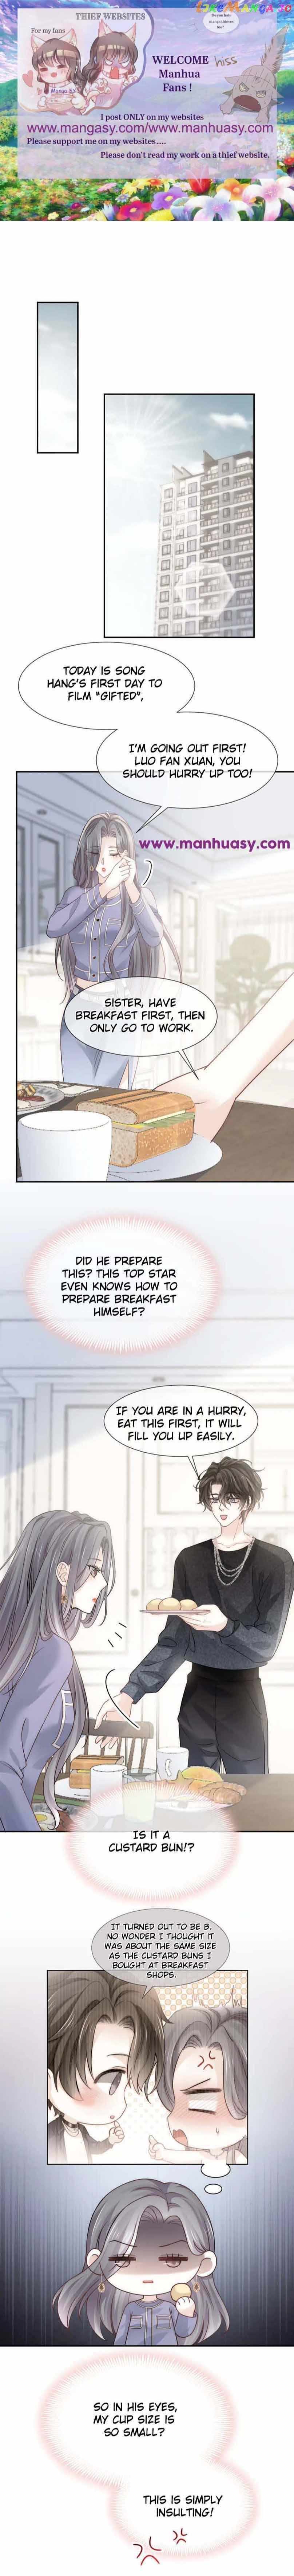 The Top Star Has Been Plotting Against Me - Page 3